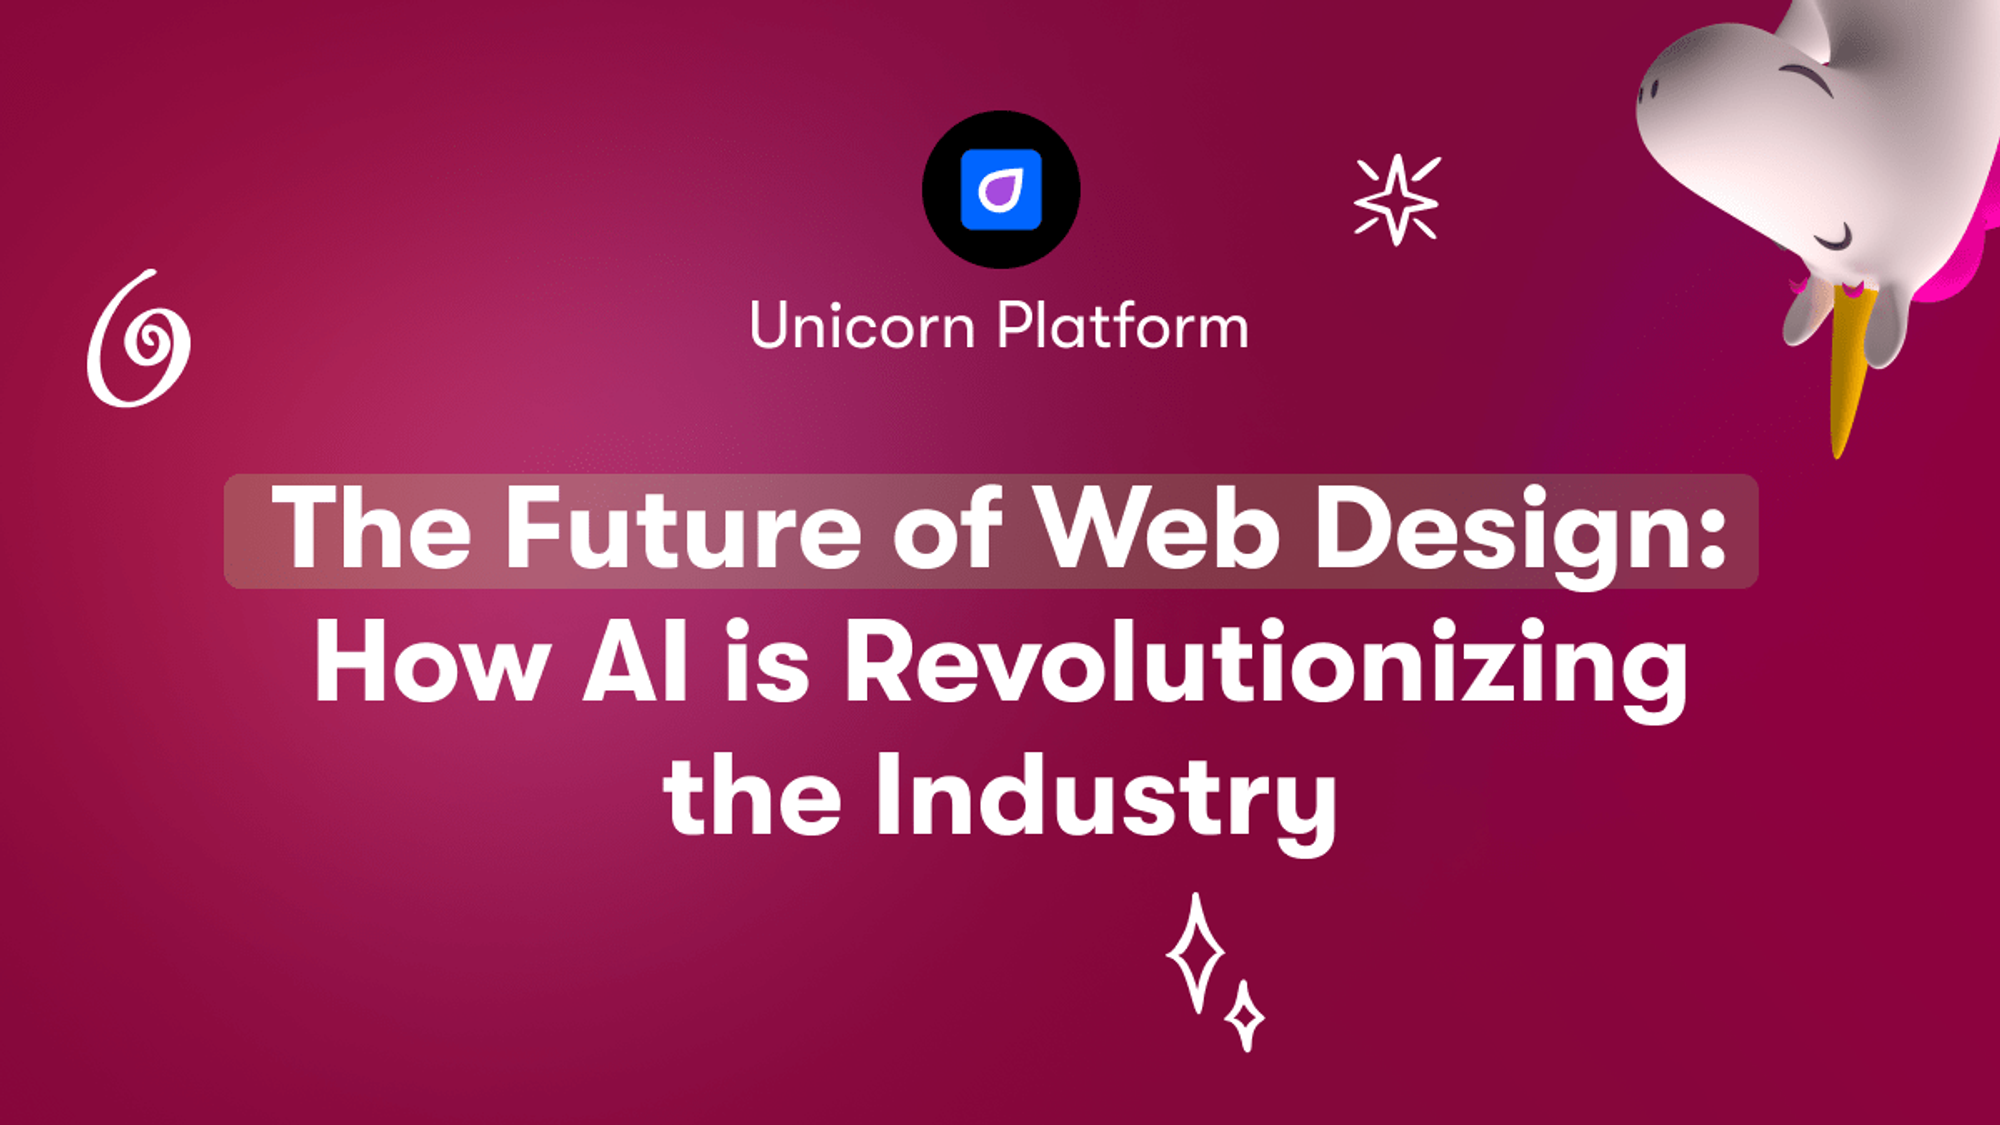 The Future of Web Design: How AI is Revolutionizing the Industry